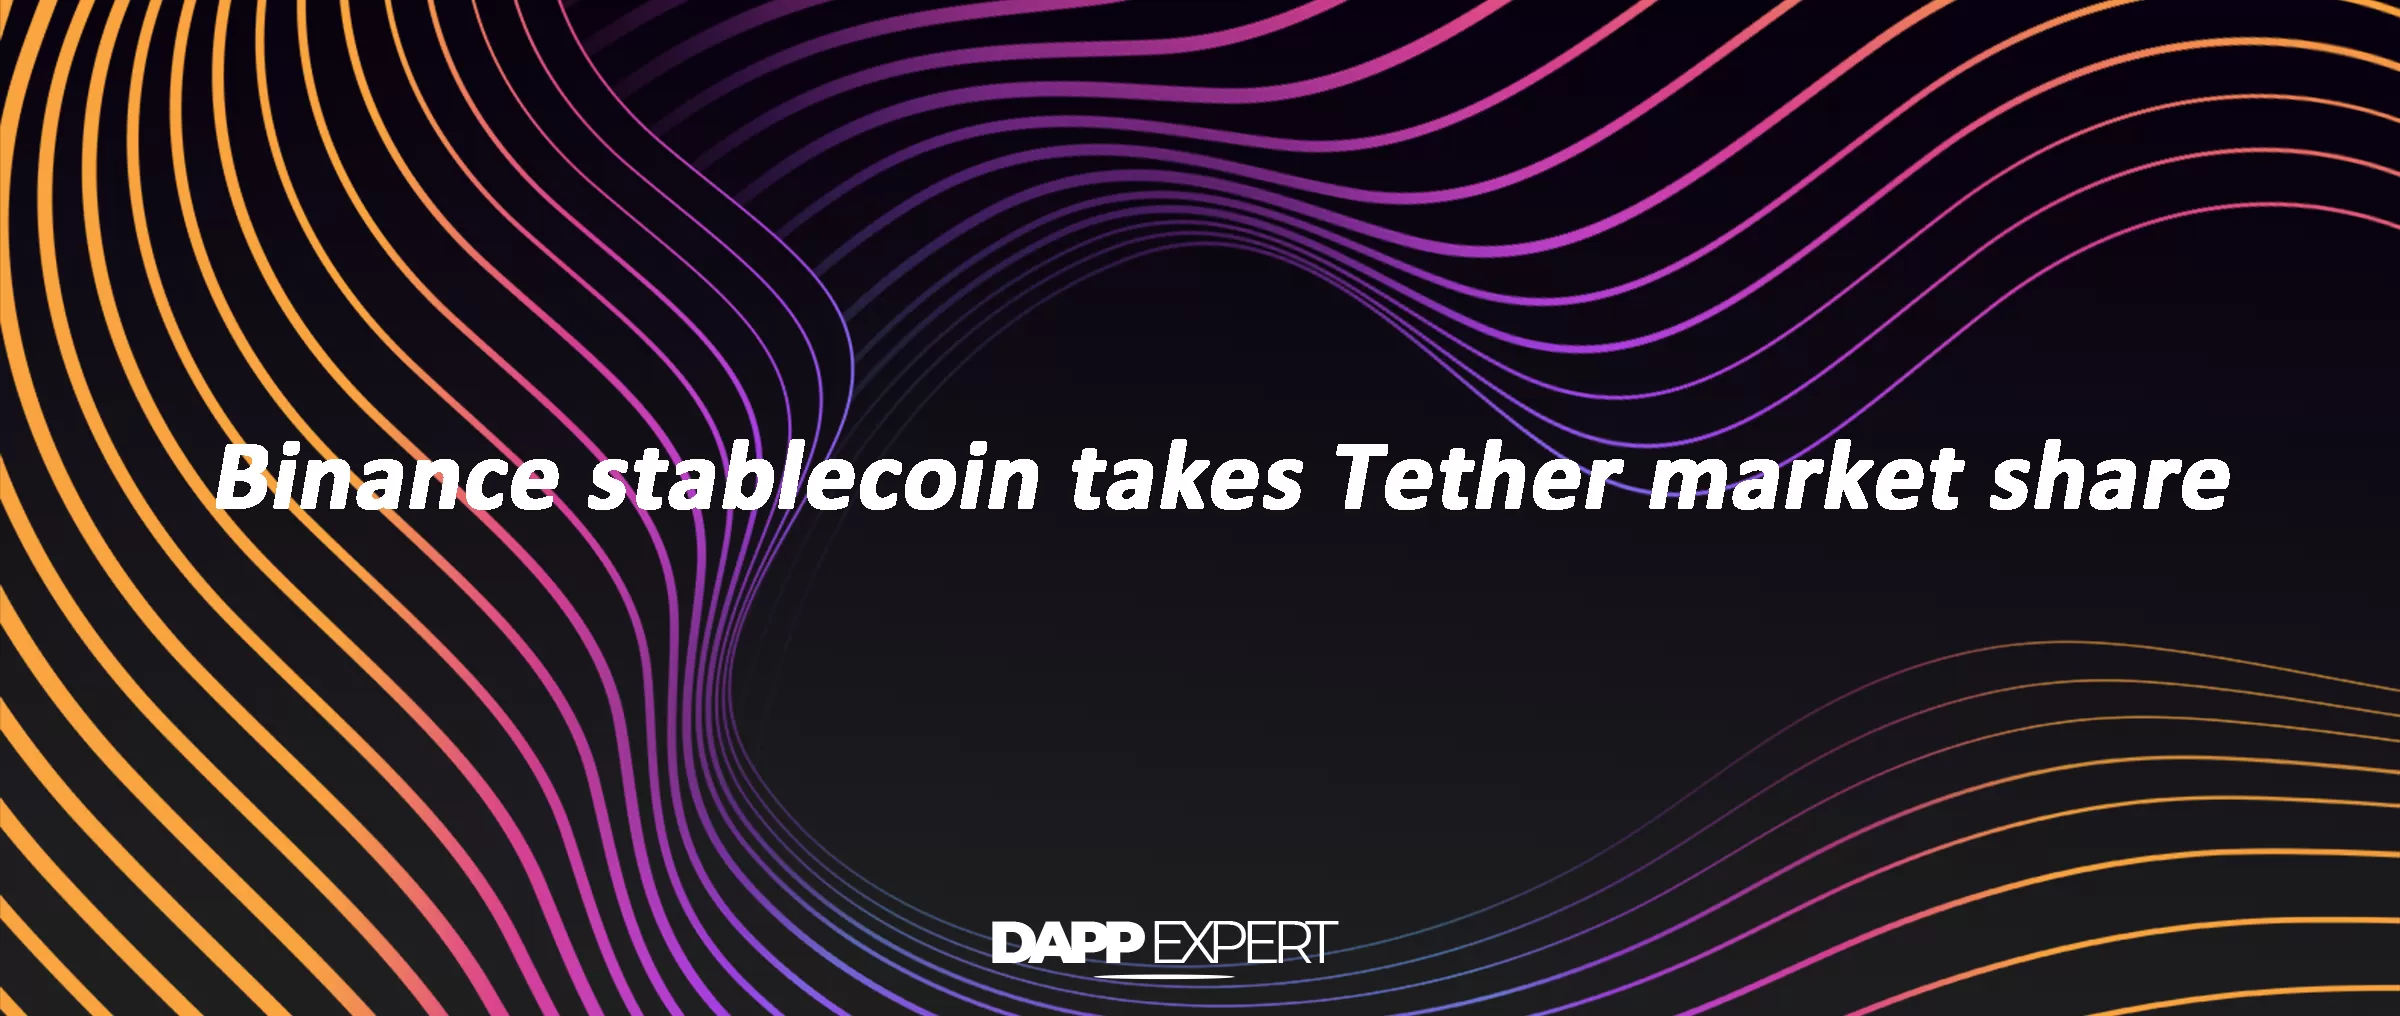 Binance stablecoin takes Tether market share